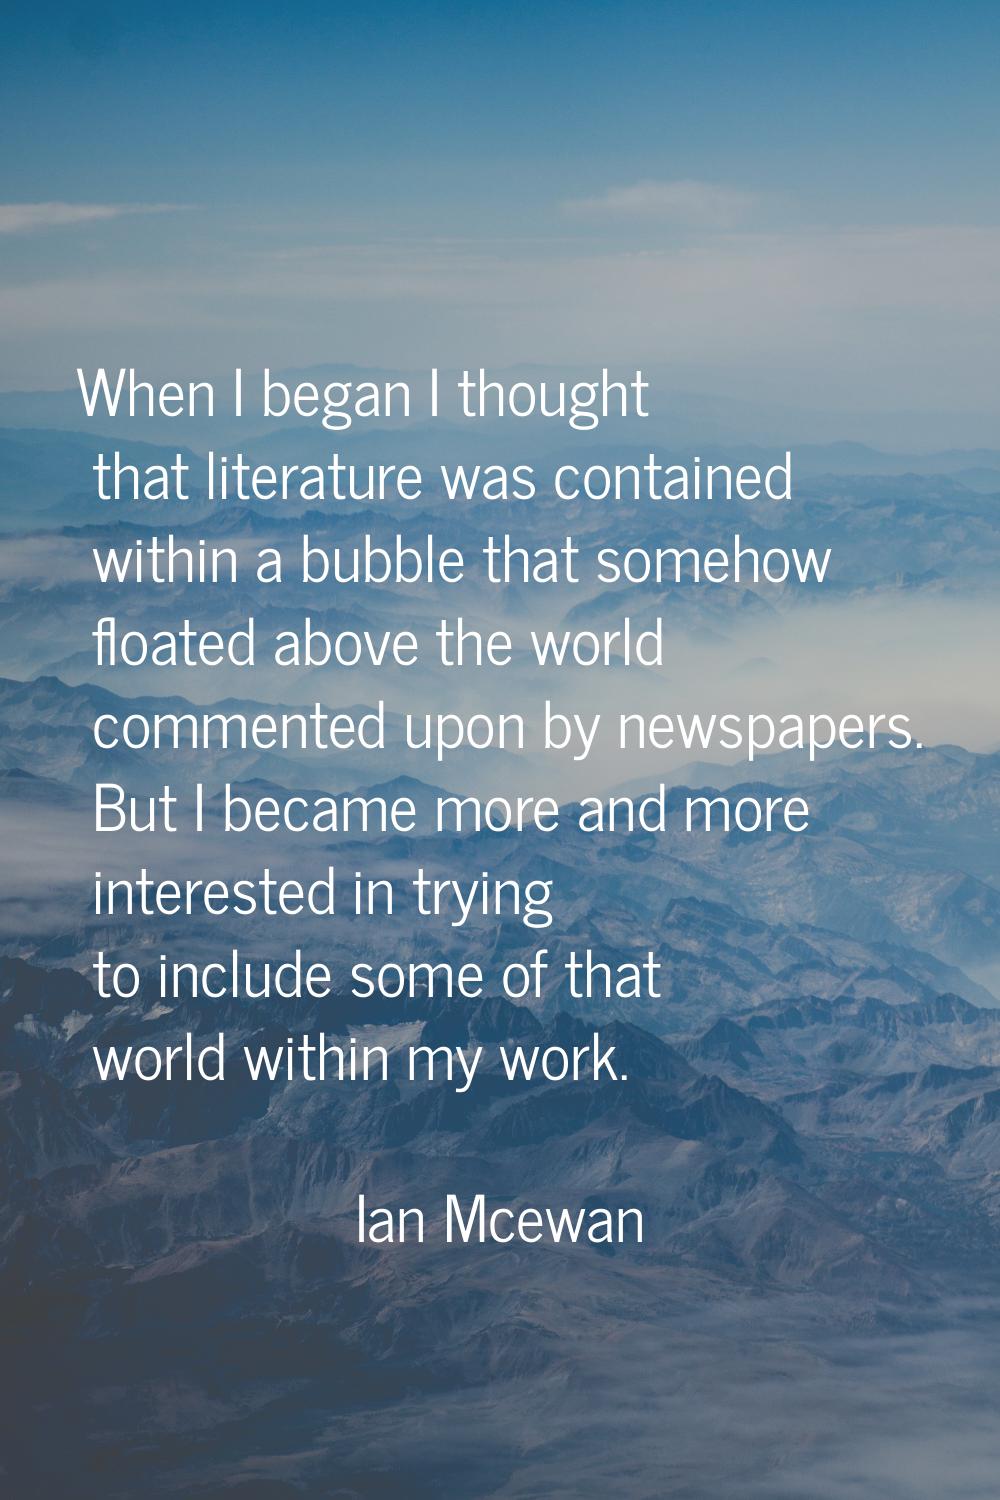 When I began I thought that literature was contained within a bubble that somehow floated above the